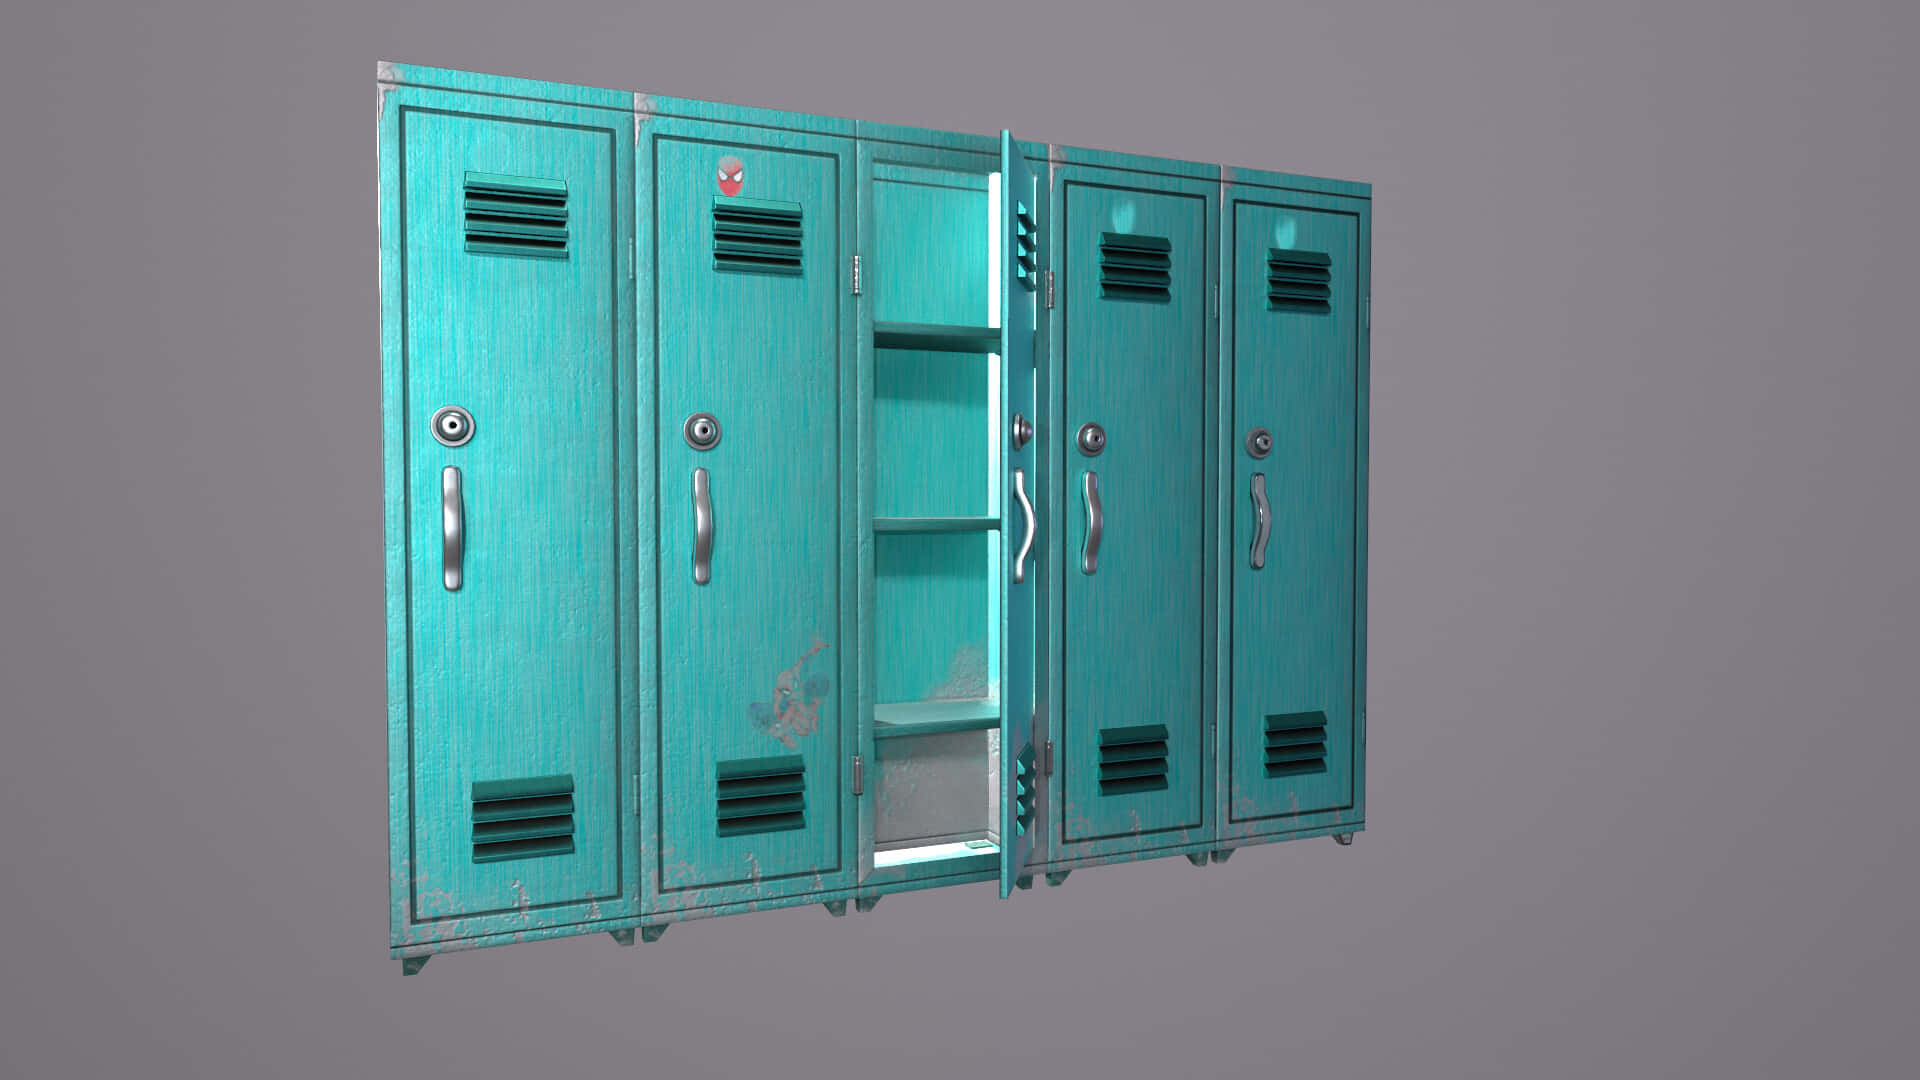 Lockers serve as the perfect storage solution for personal items and belongings